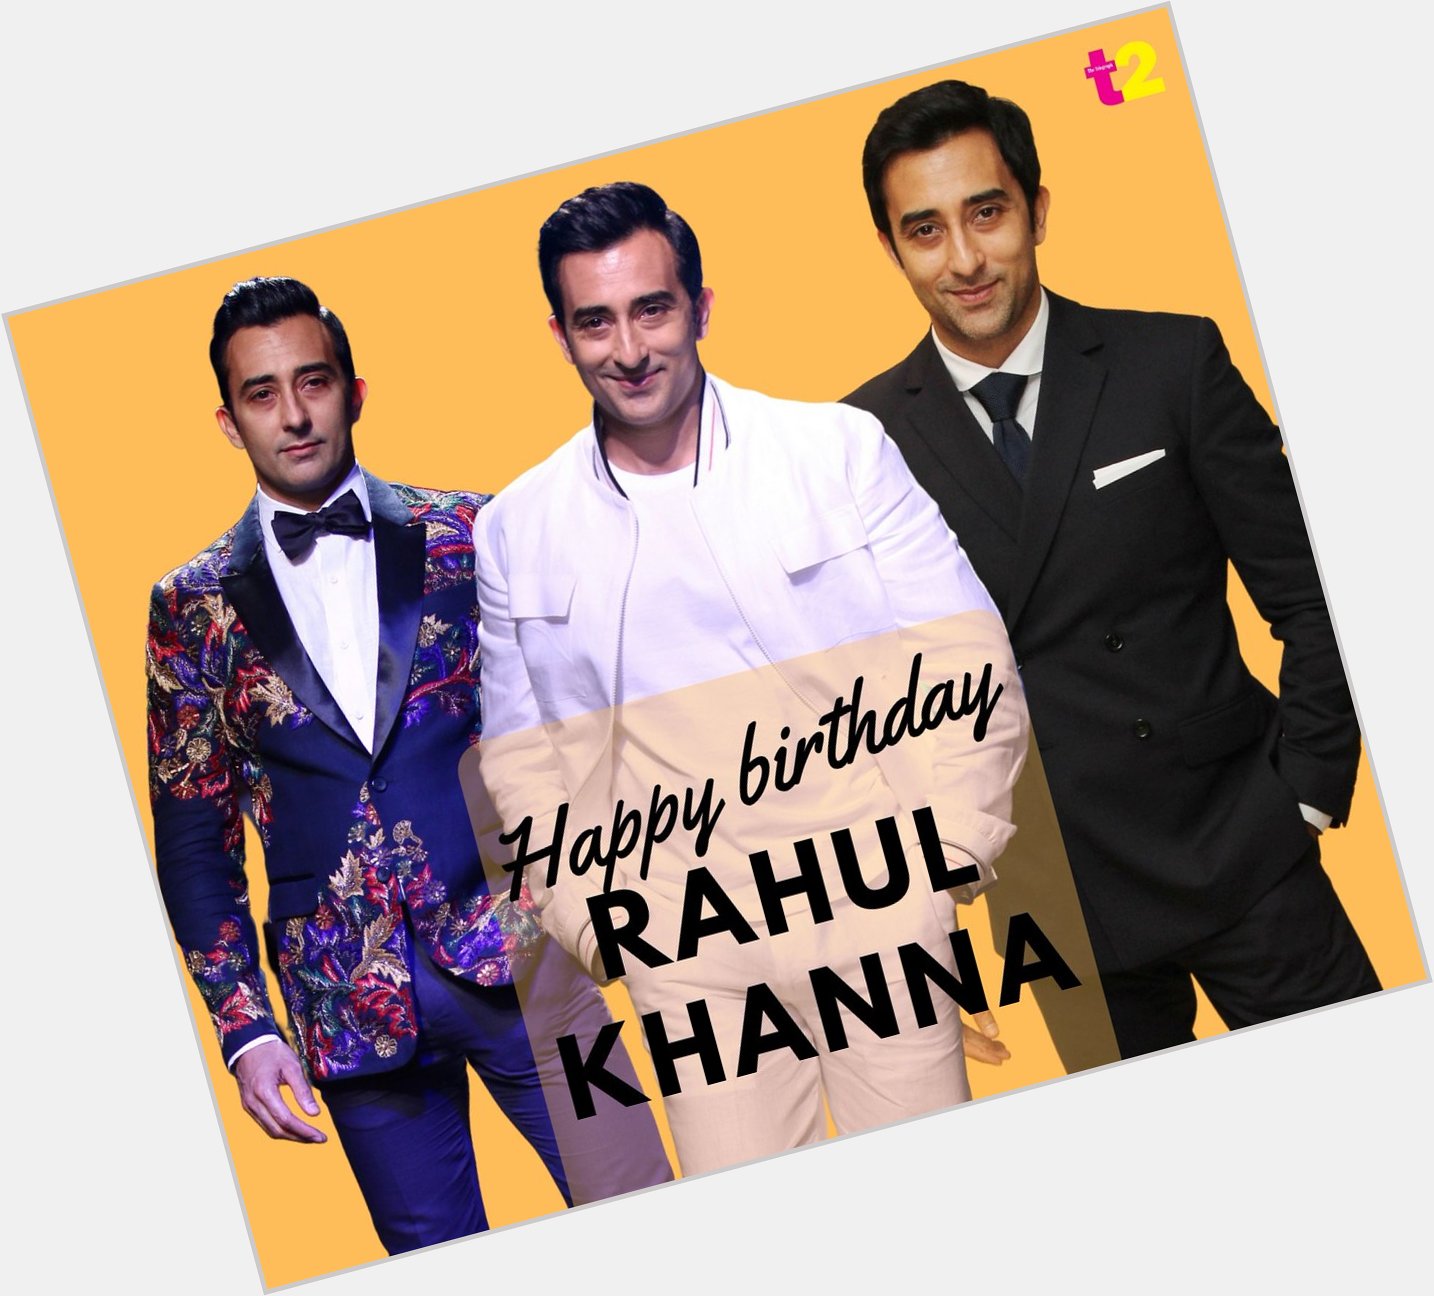 T2 wishes our Rahul Khanna a very happy birthday! 